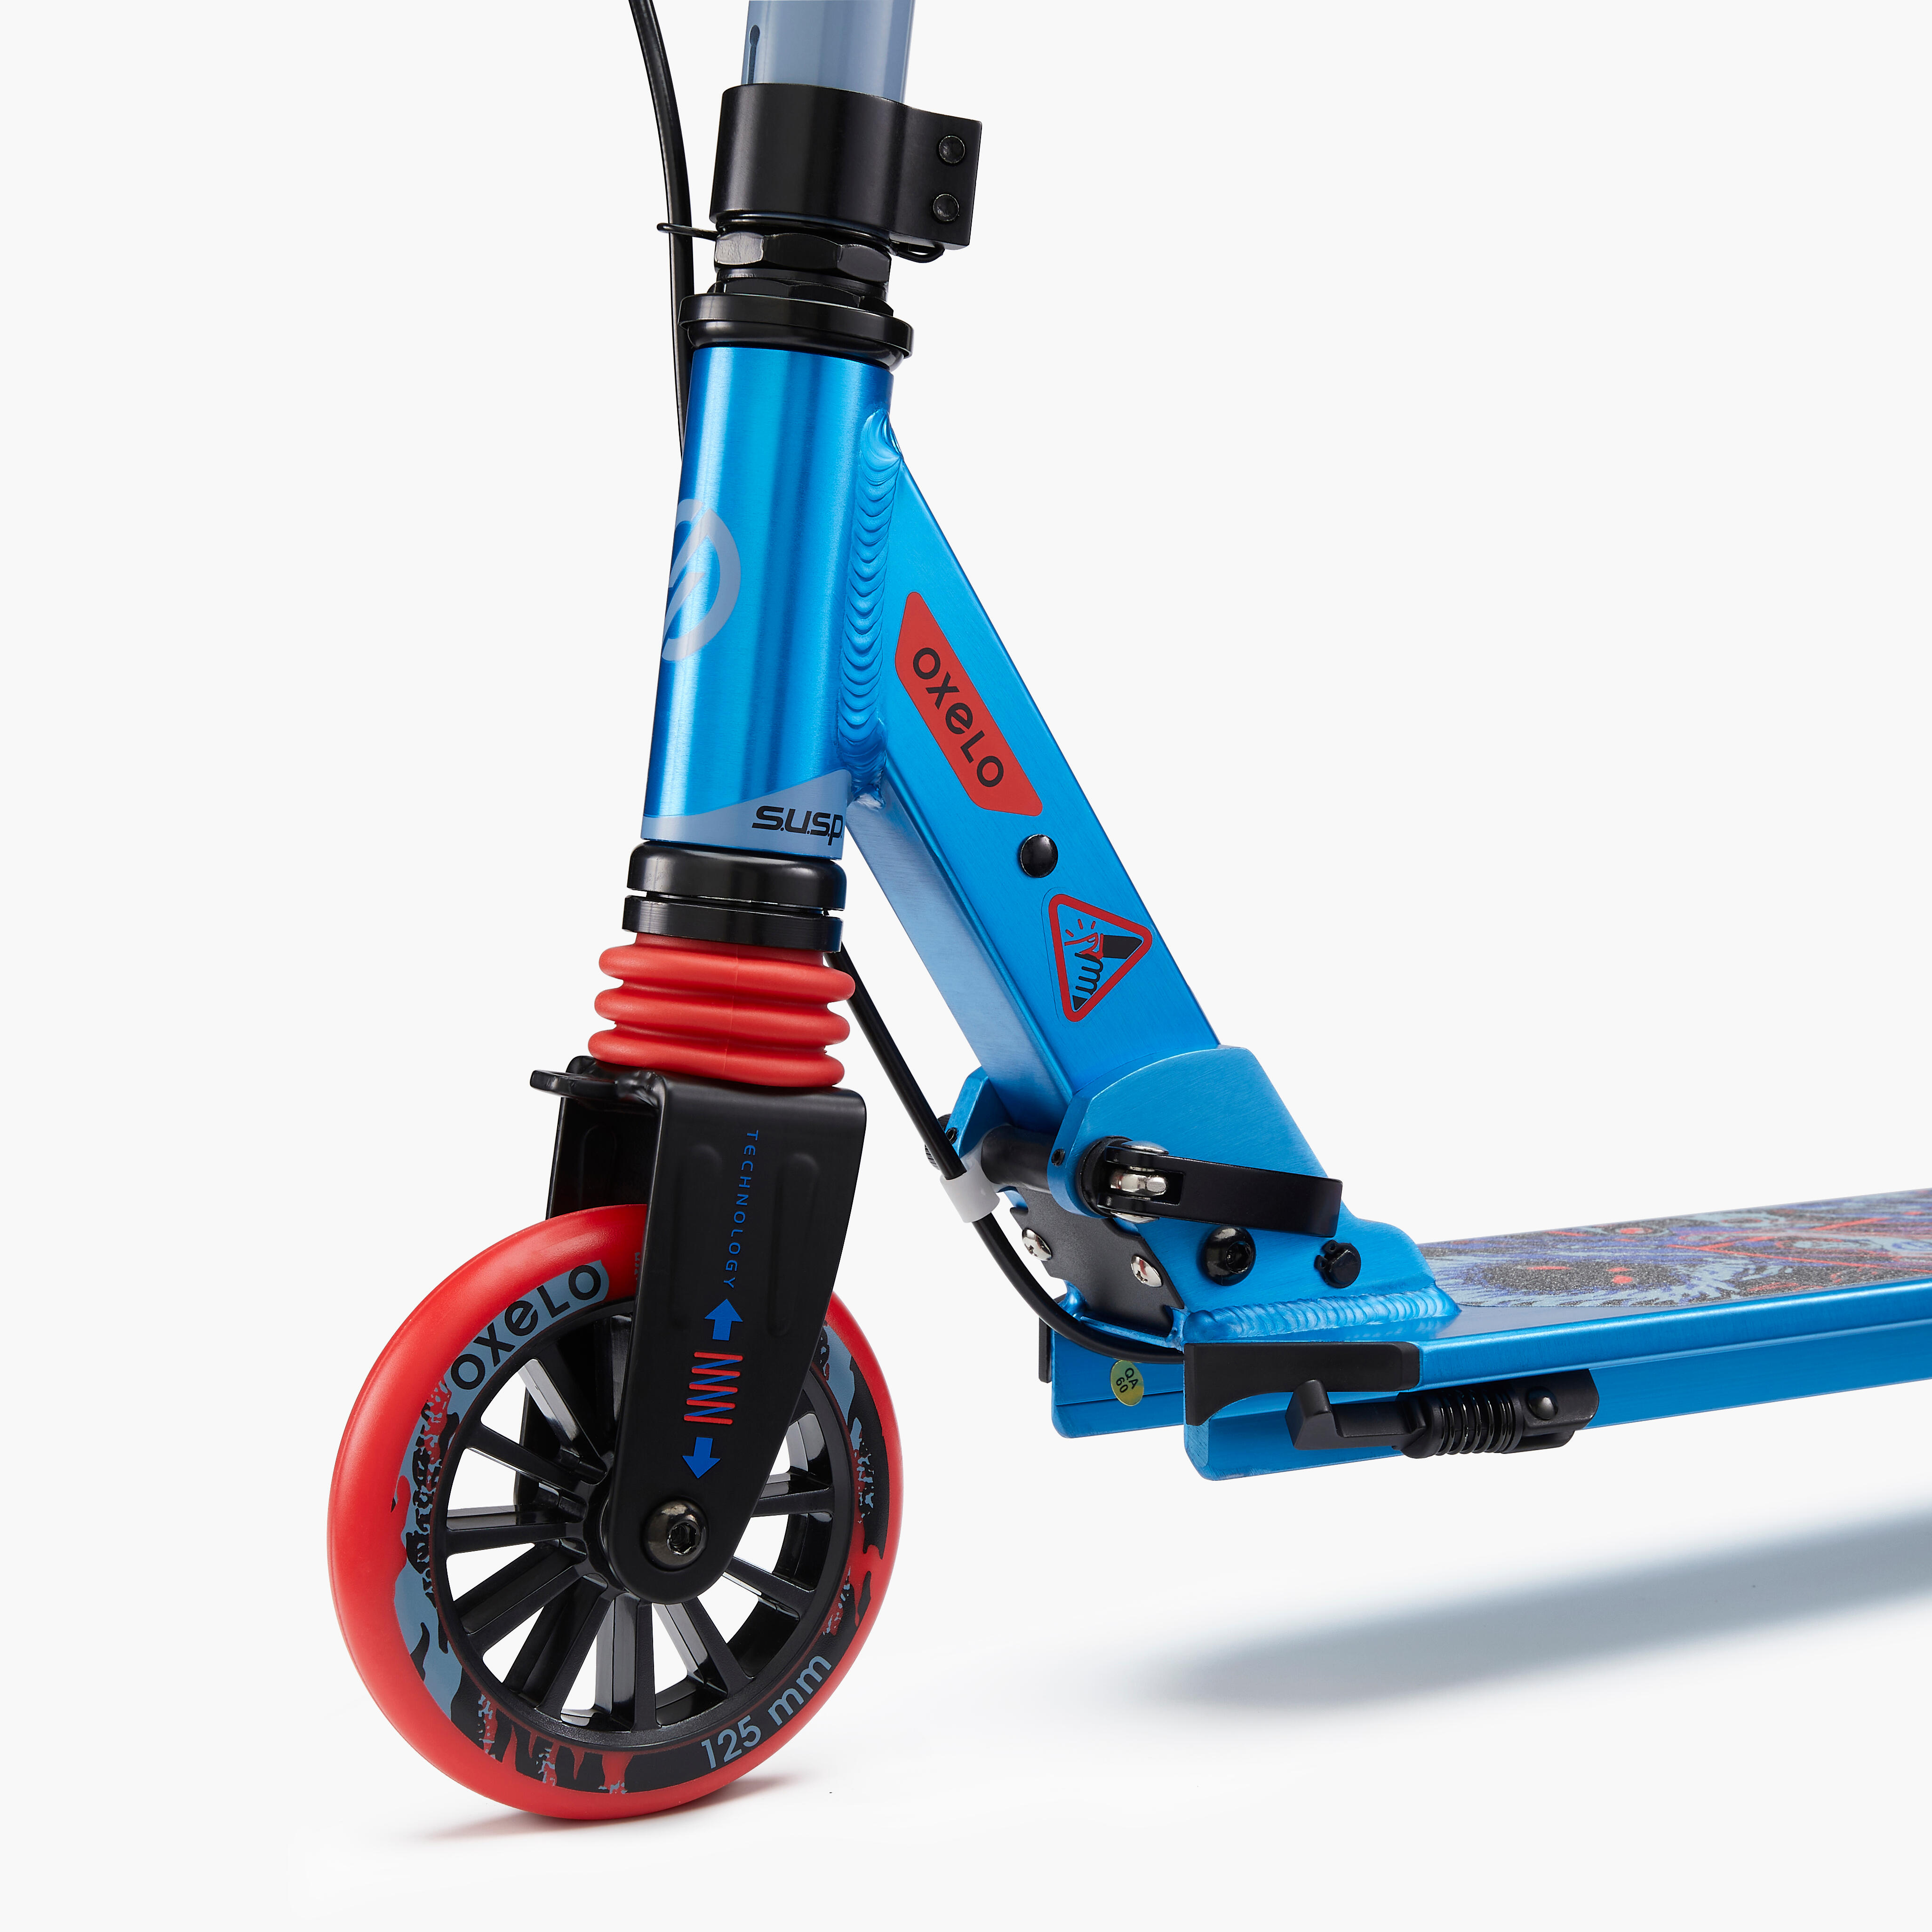 Kids' Kick Scooter - MID5 Blue - Blue, Red, Black - Oxelo - Decathlon